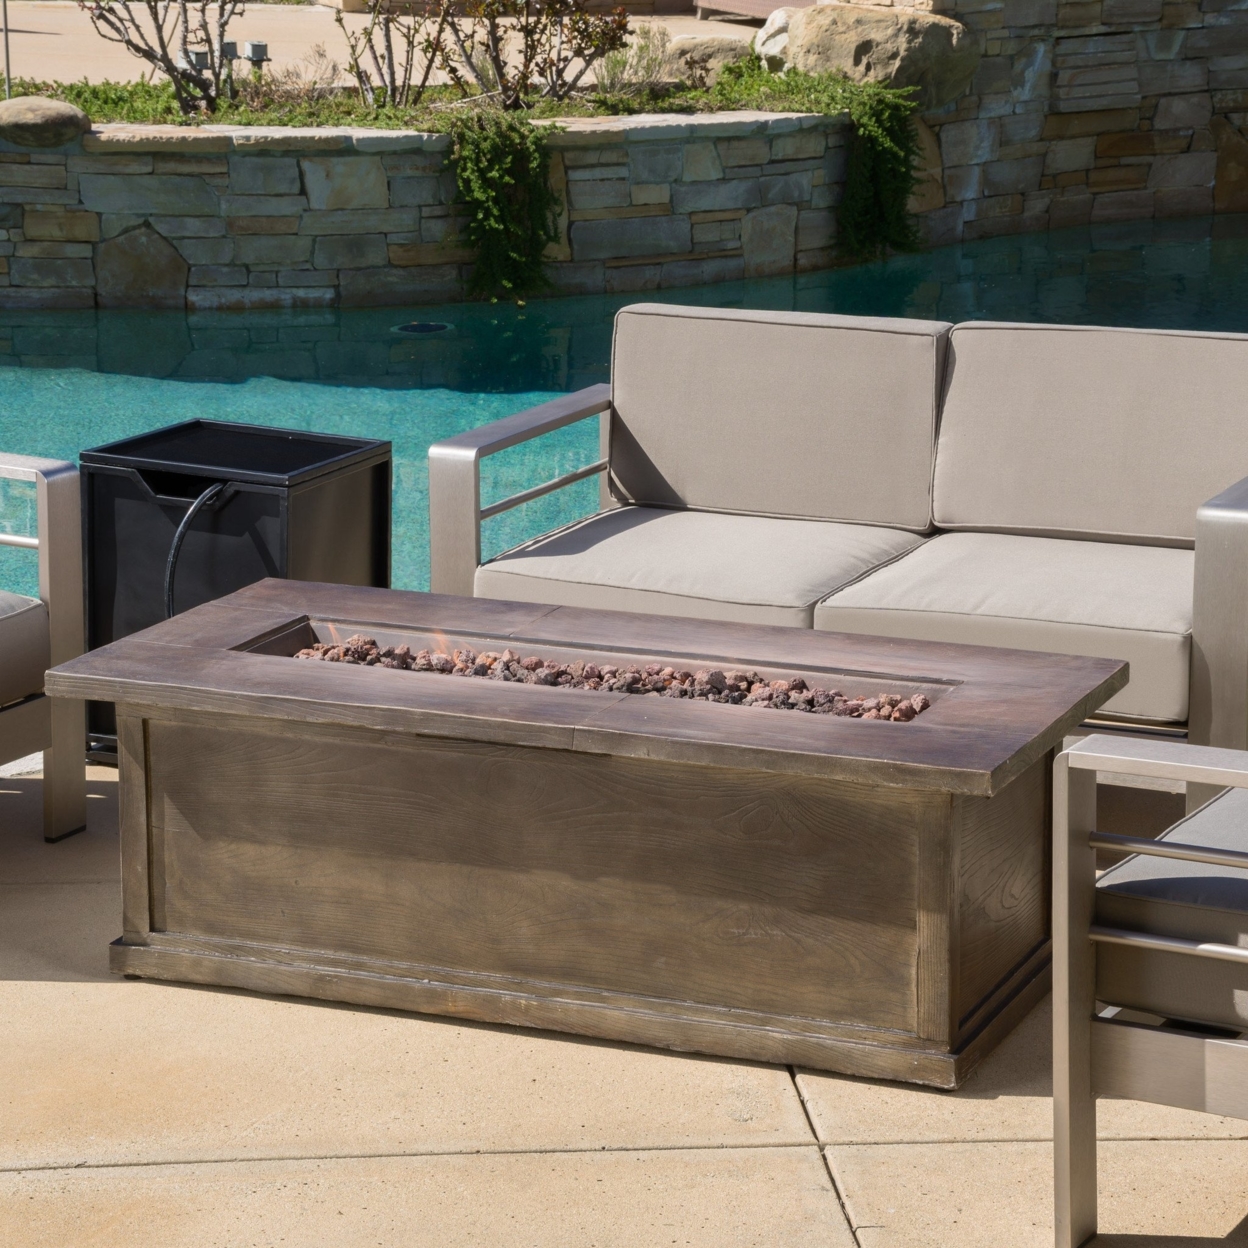 Pablo Outdoor 56-inch Rectangular Propane Fire Table - Gray Wood